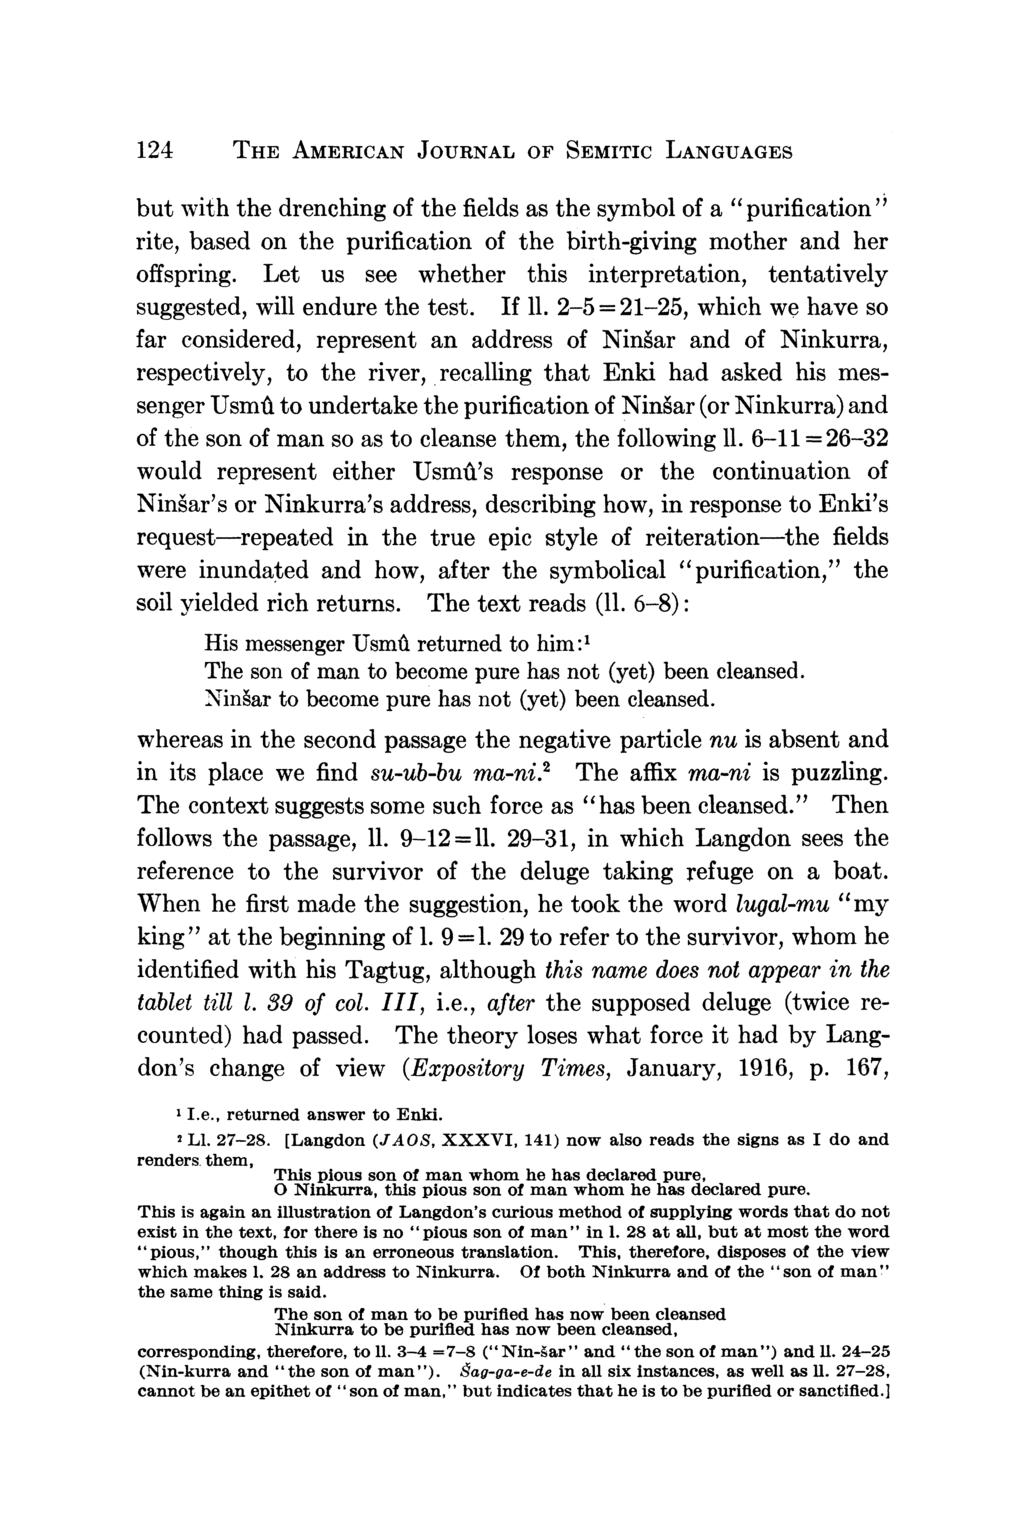 124 THE AMERICAN JOURNAL OF SEMITIC LANGUAGES but with the drenching of the fields as the symbol of a "purification" rite, based on the purification of the birth-giving mother and her offspring.